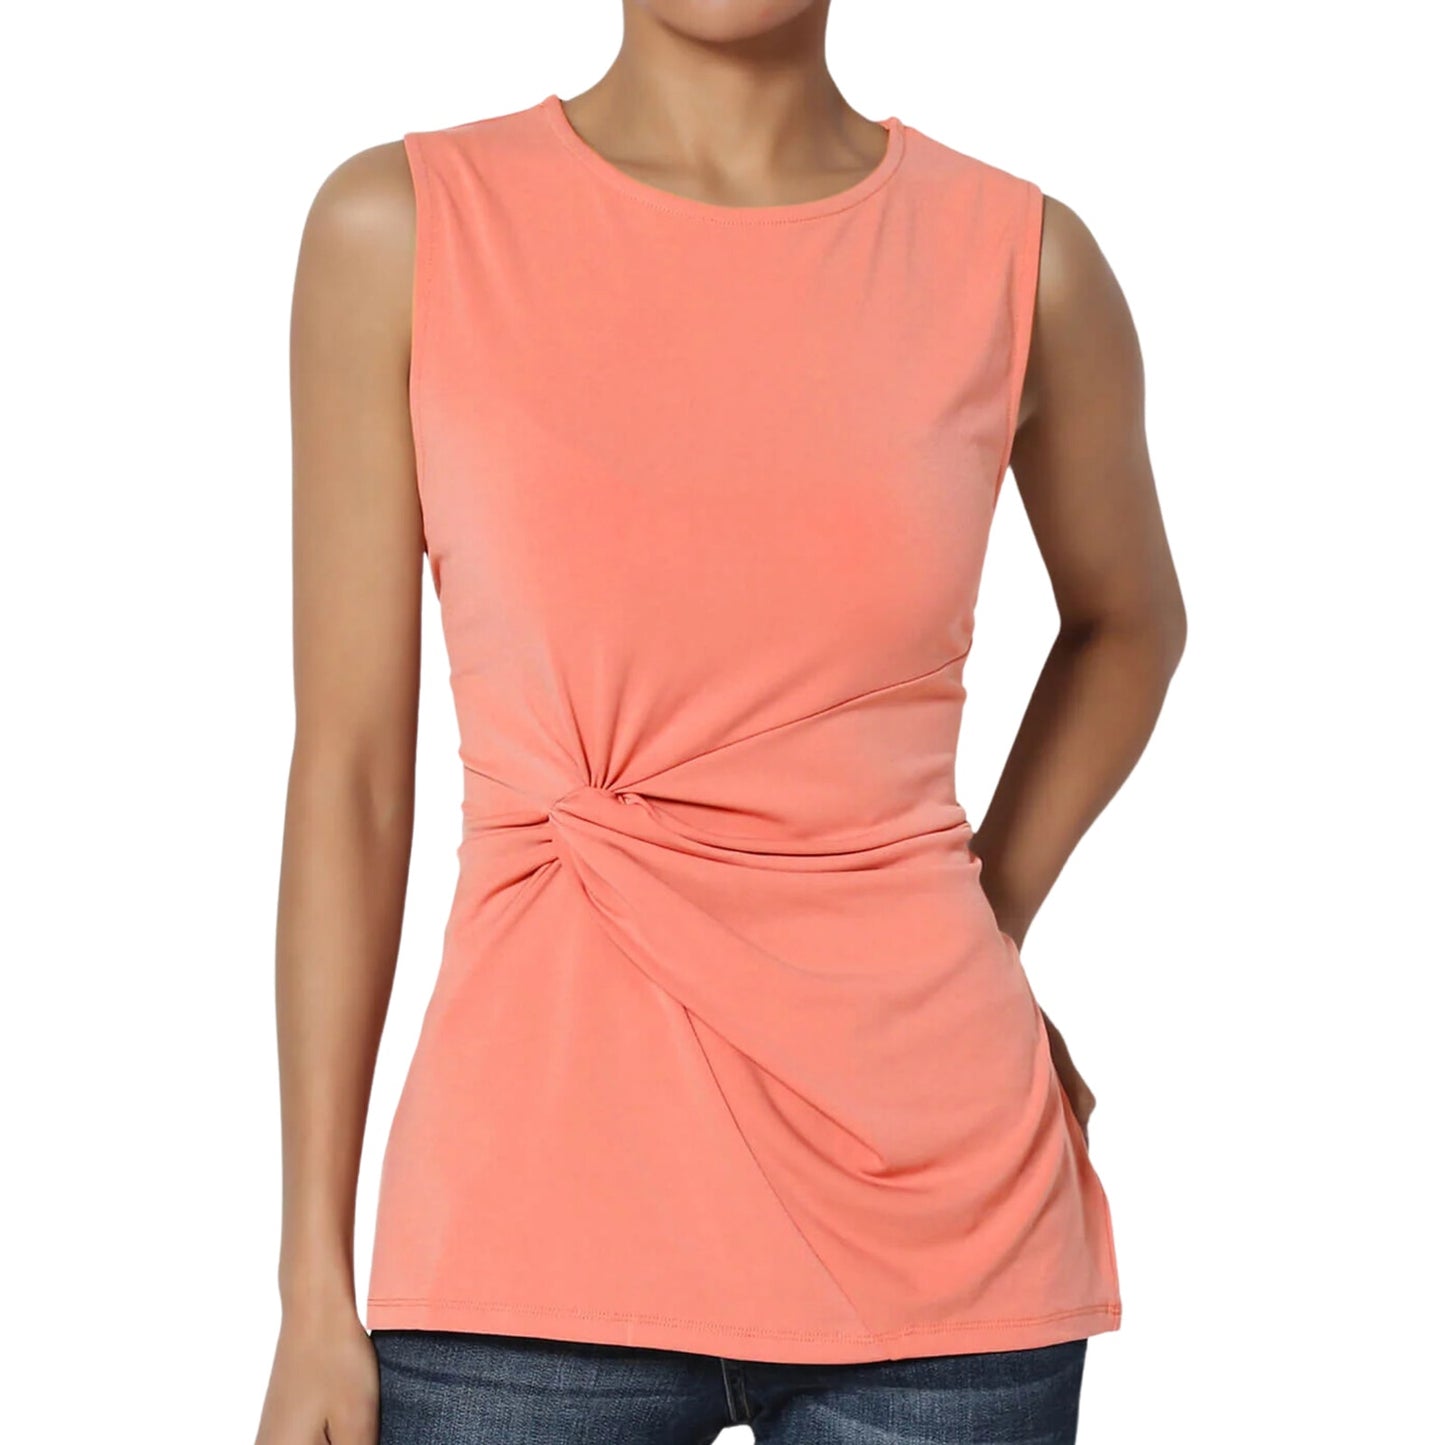 DKNY Knot Front Tank Top in Coral NWT Size Medium